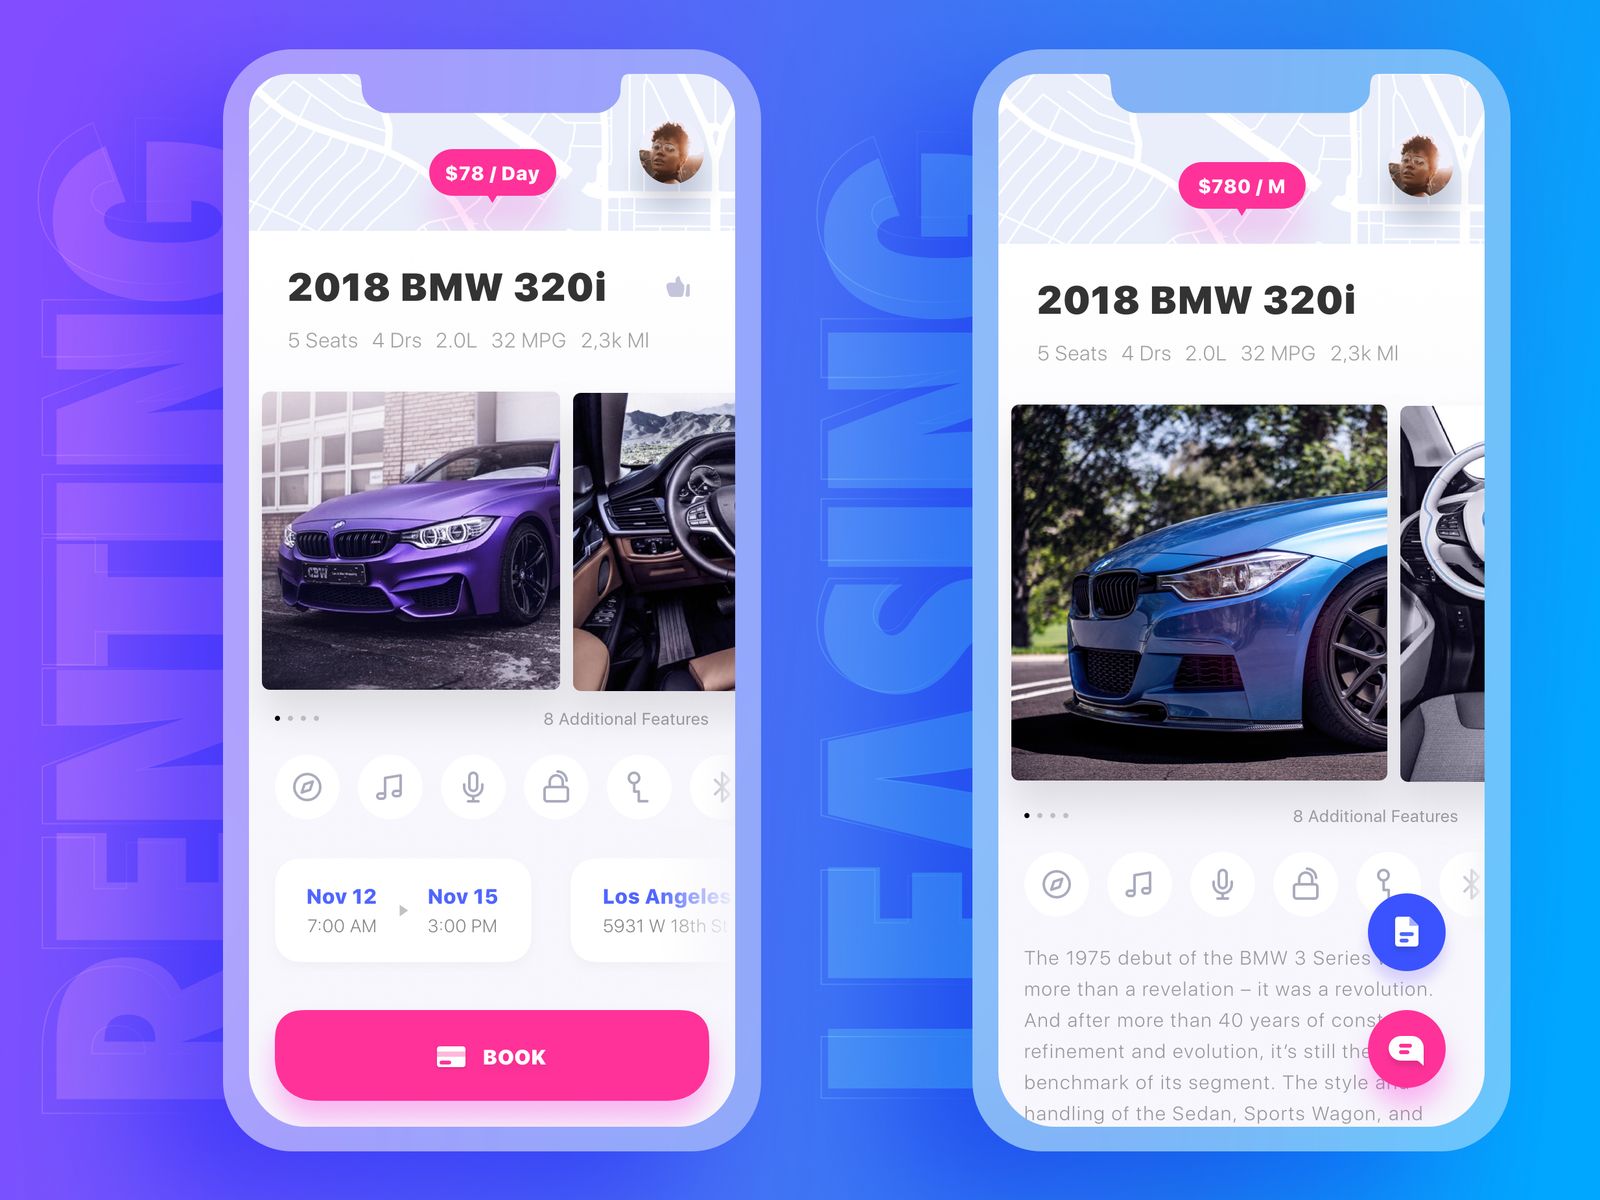 A comprehensive description of the vehicle increase chances that user will book it (*image by [Yaroslav Zubko](https://dribbble.com/Yar_Z){ rel="nofollow" .default-md}*)